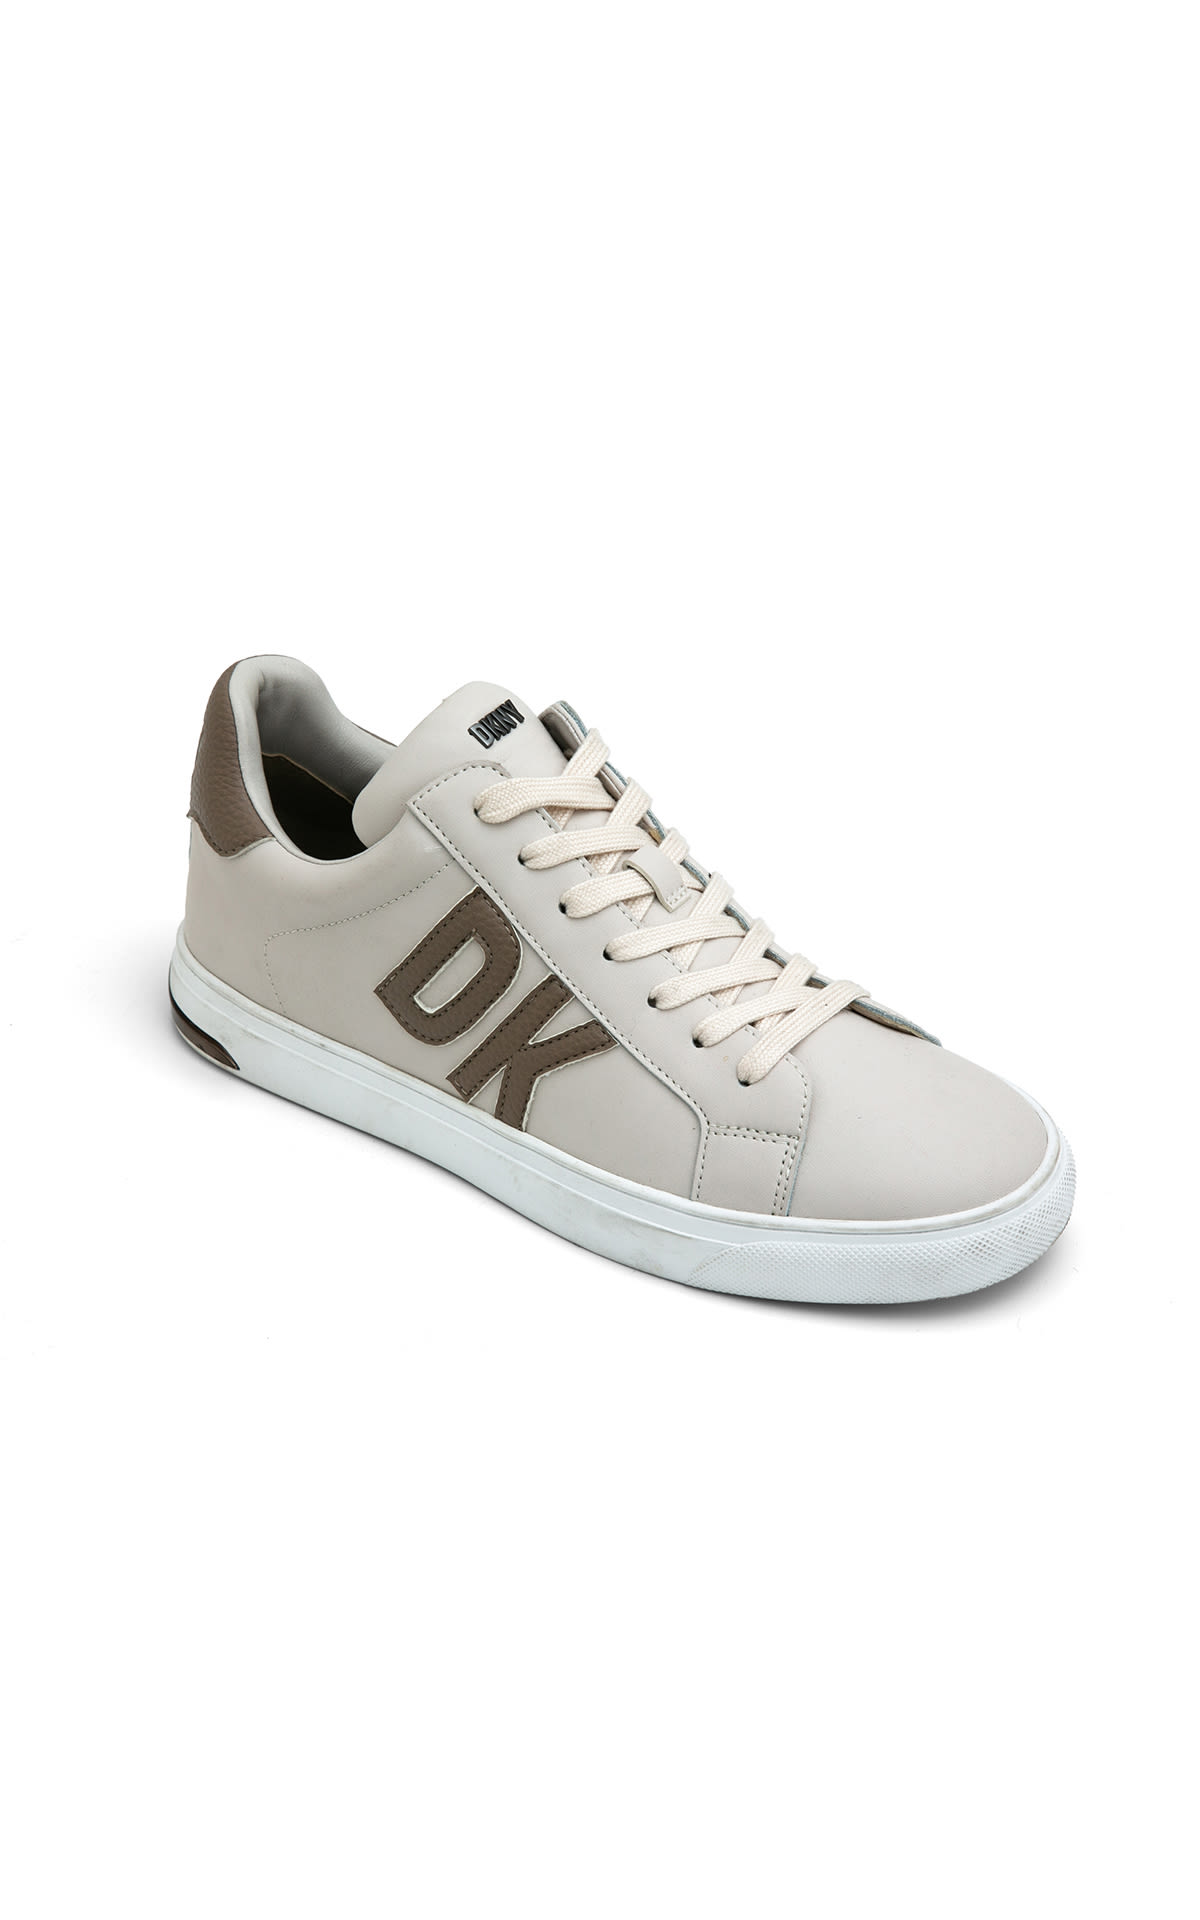 DKNY Abeni lace-up sneaker from Bicester Village